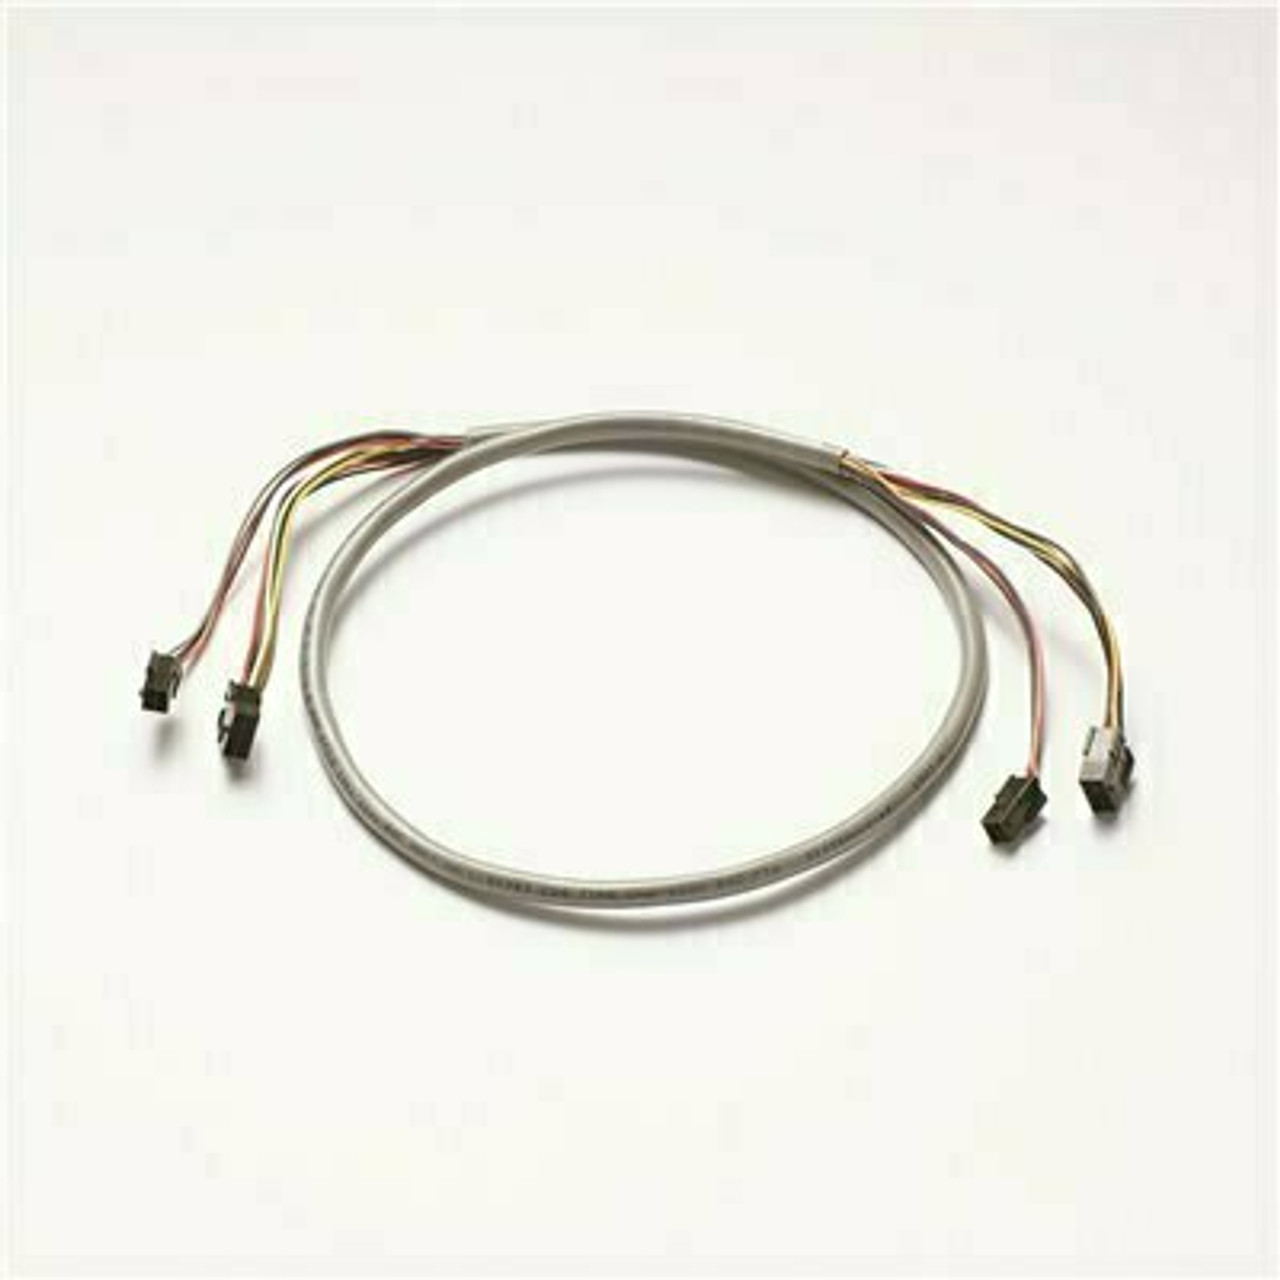 Mckinney 4.5 In. X 4.5 In. Electrolynx Cables - 307492397